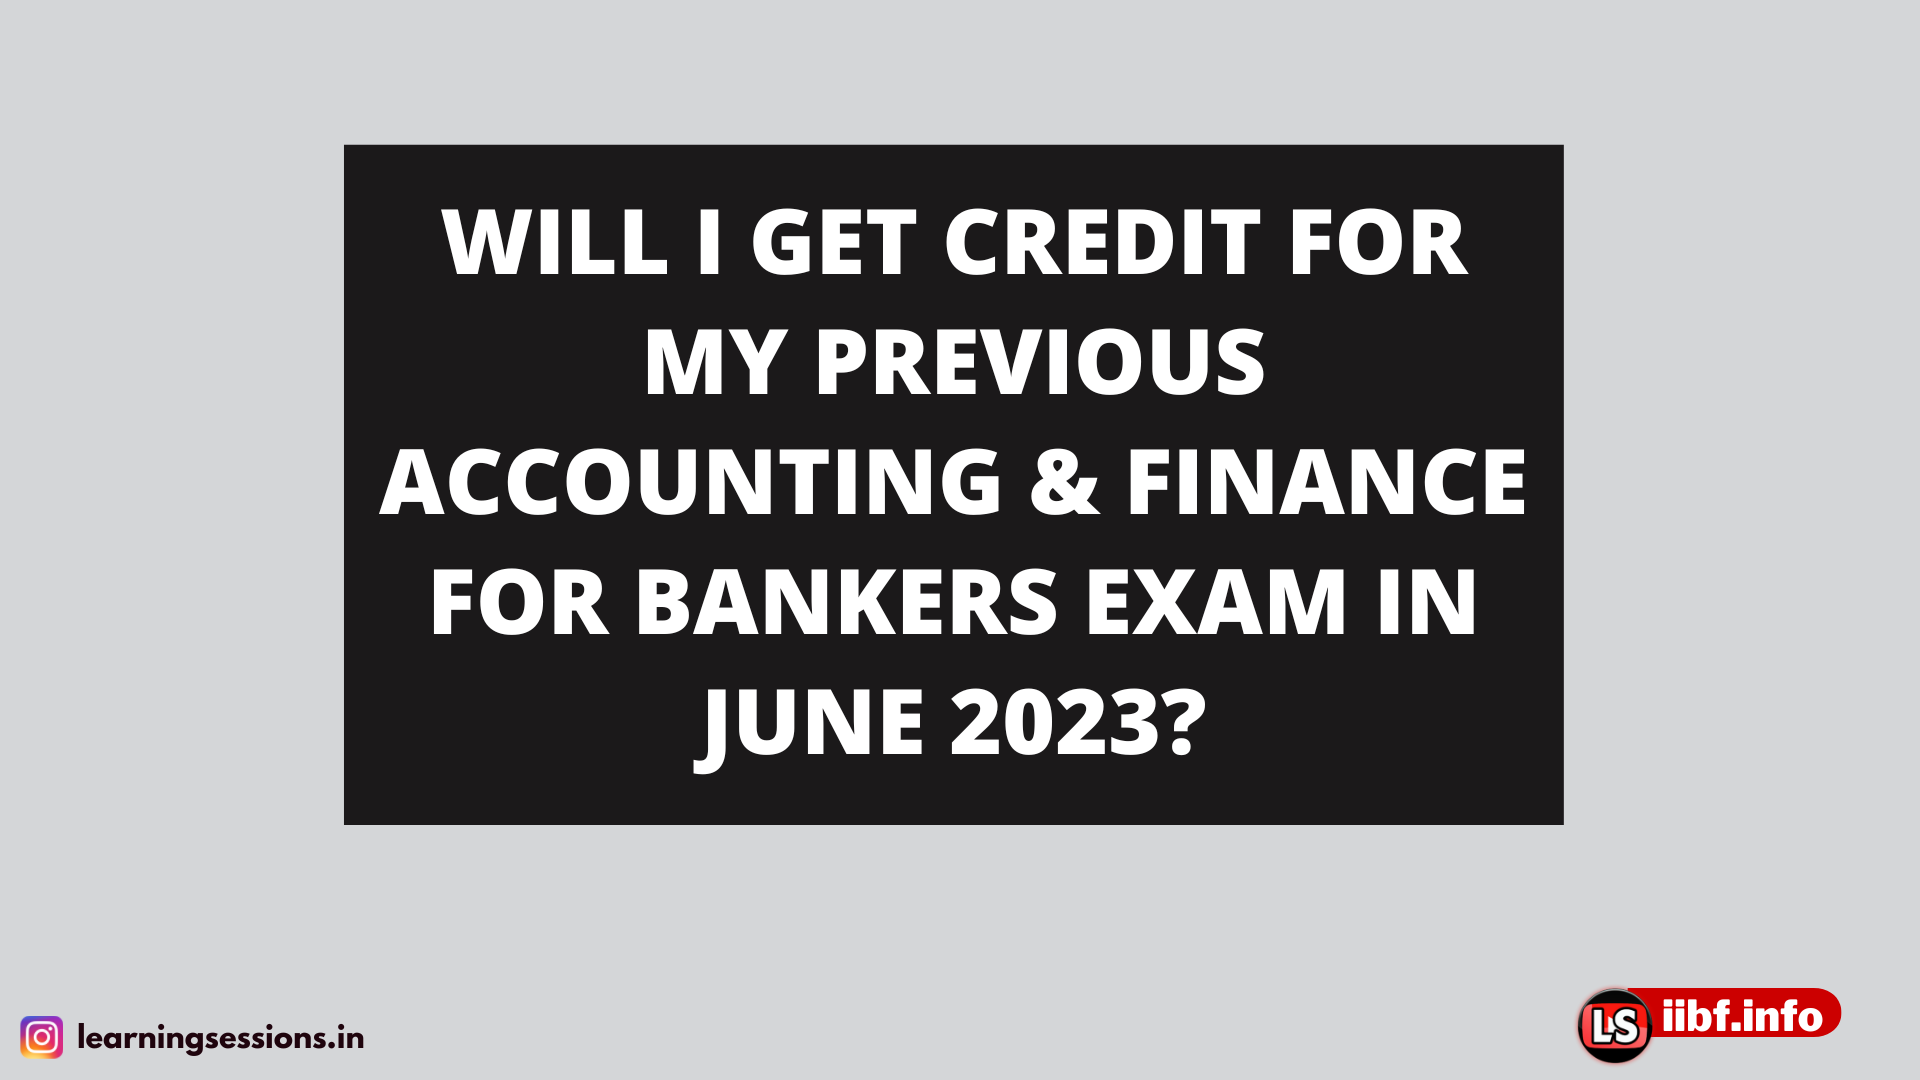 WILL I GET CREDIT FOR MY PREVIOUS ACCOUNTING & FINANCE FOR BANKERS EXAM IN JUNE 2023?